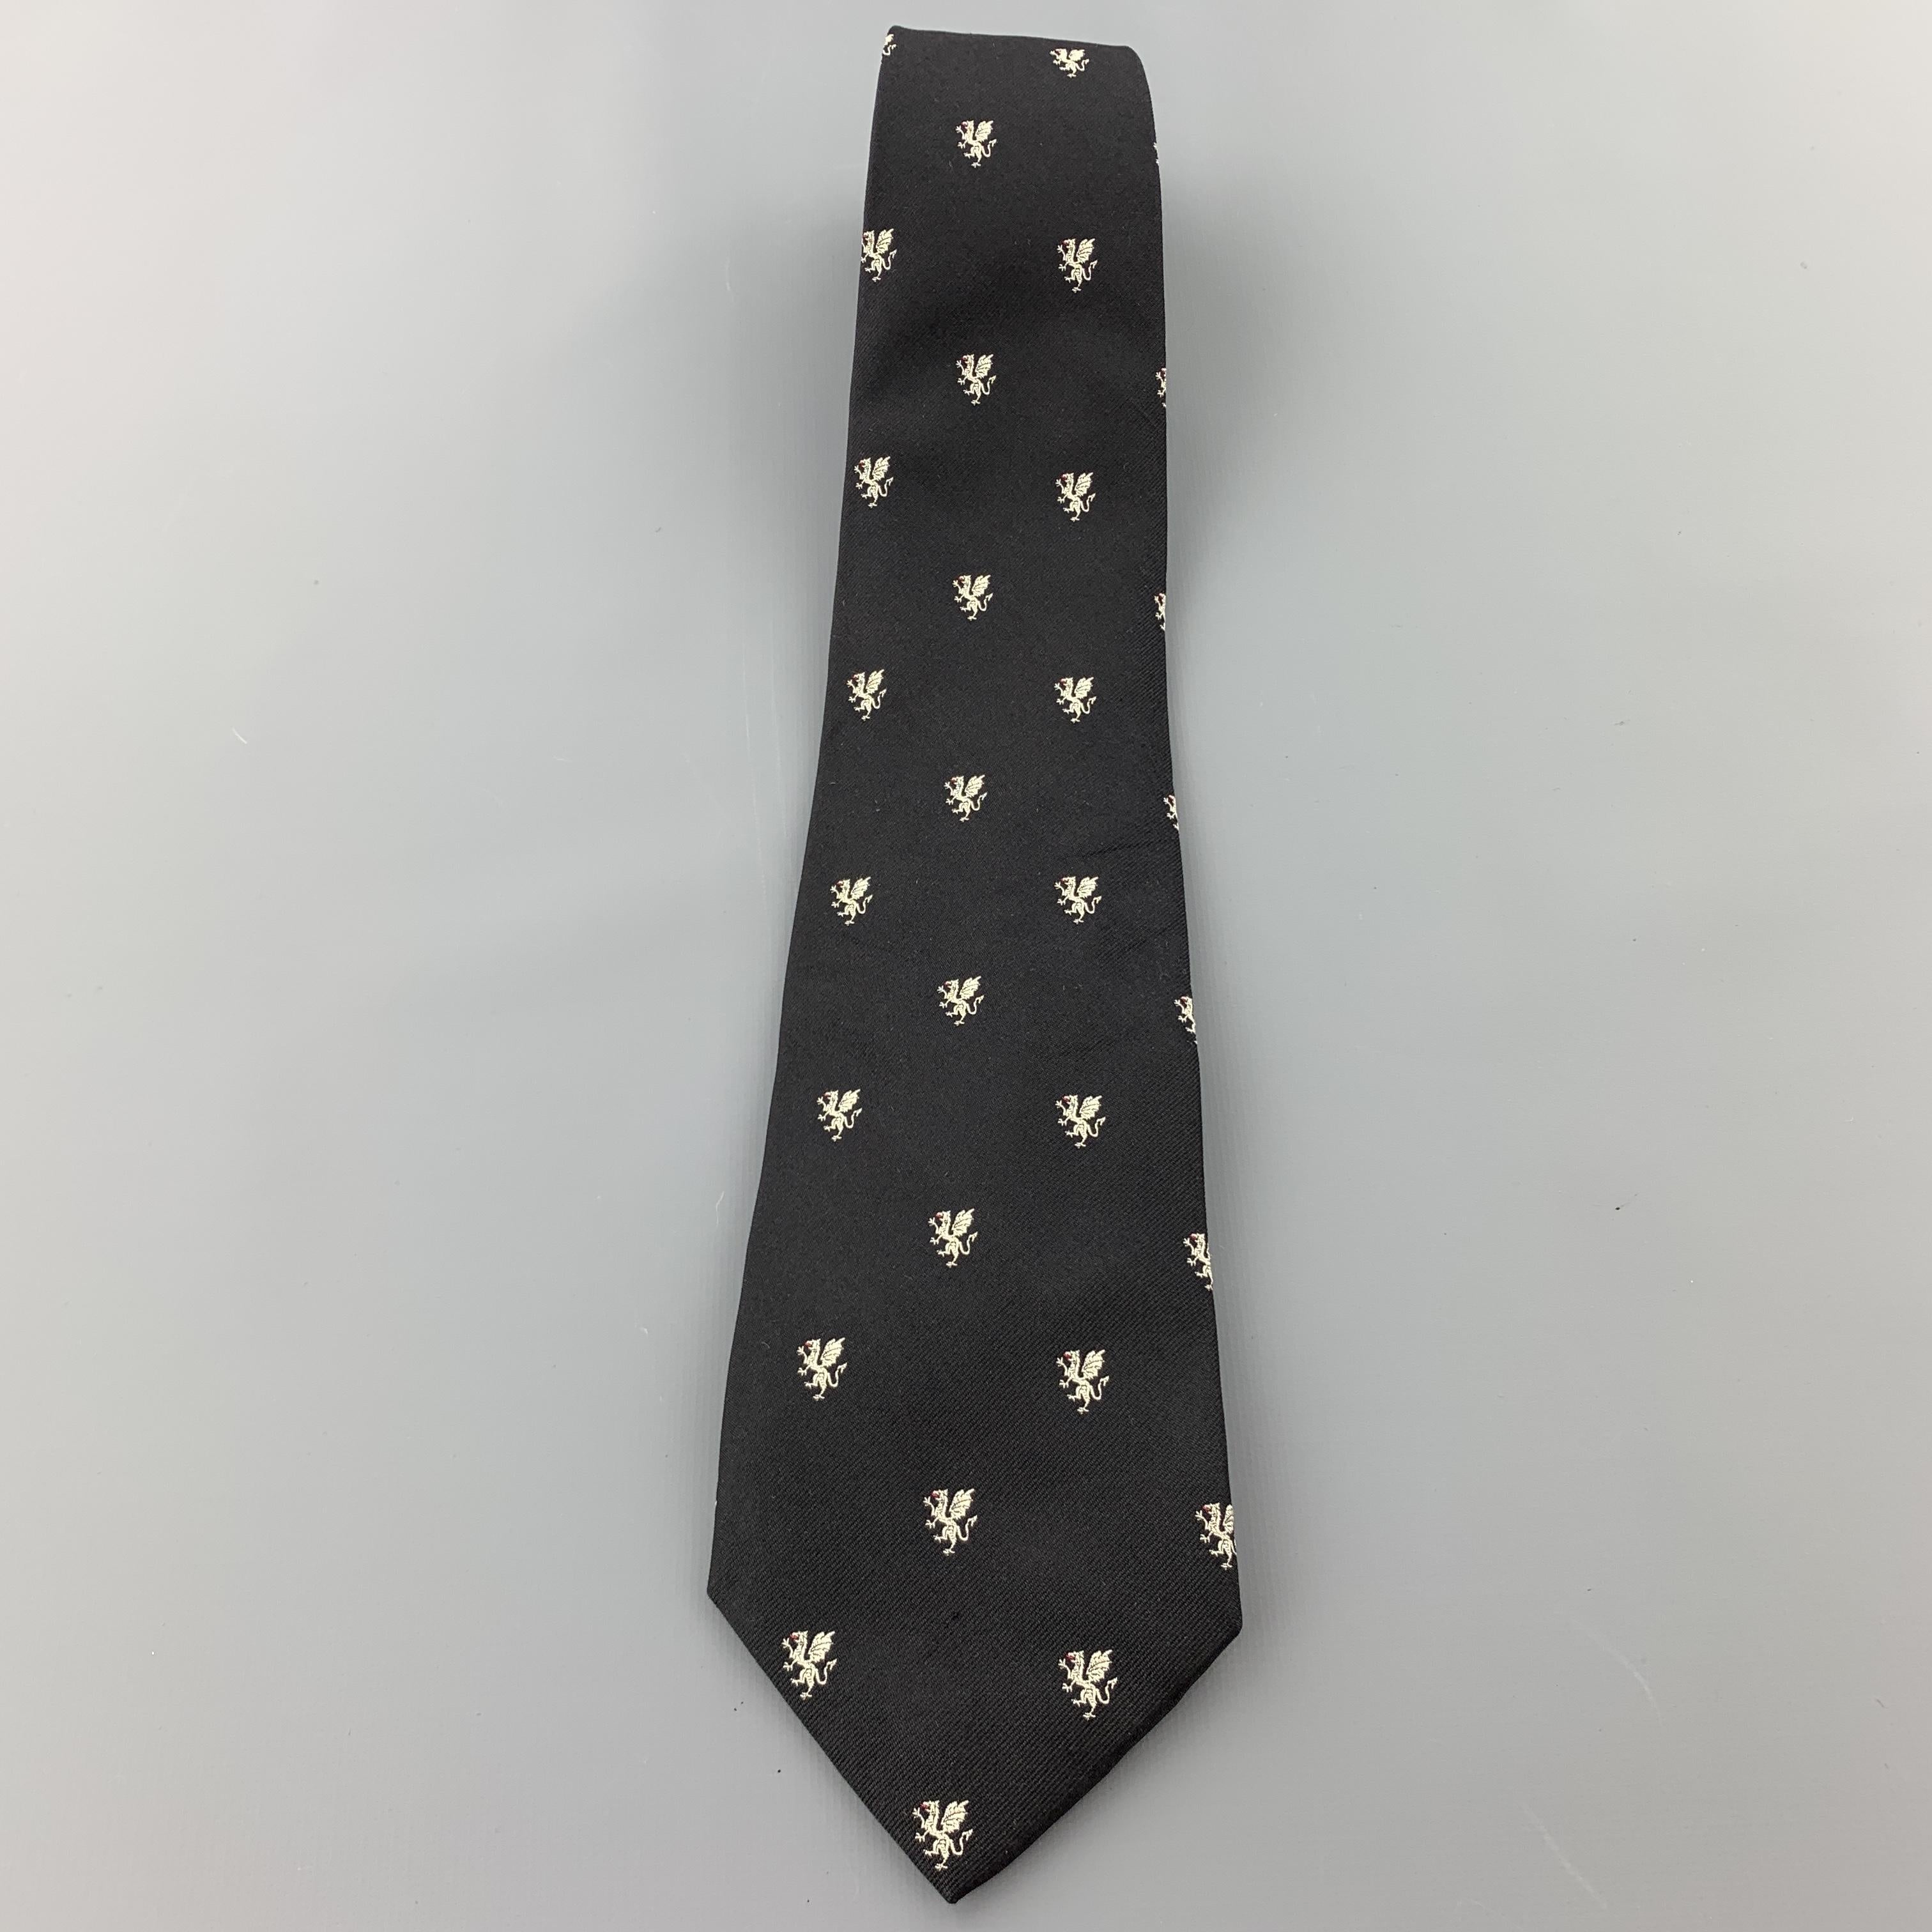 RALPH LAUREN Purple Label necktie comes in black silk twill with all over white dragon print. Hand made in Italy.

Excellent Pre-Owned Condition.

Width: 4 in.  